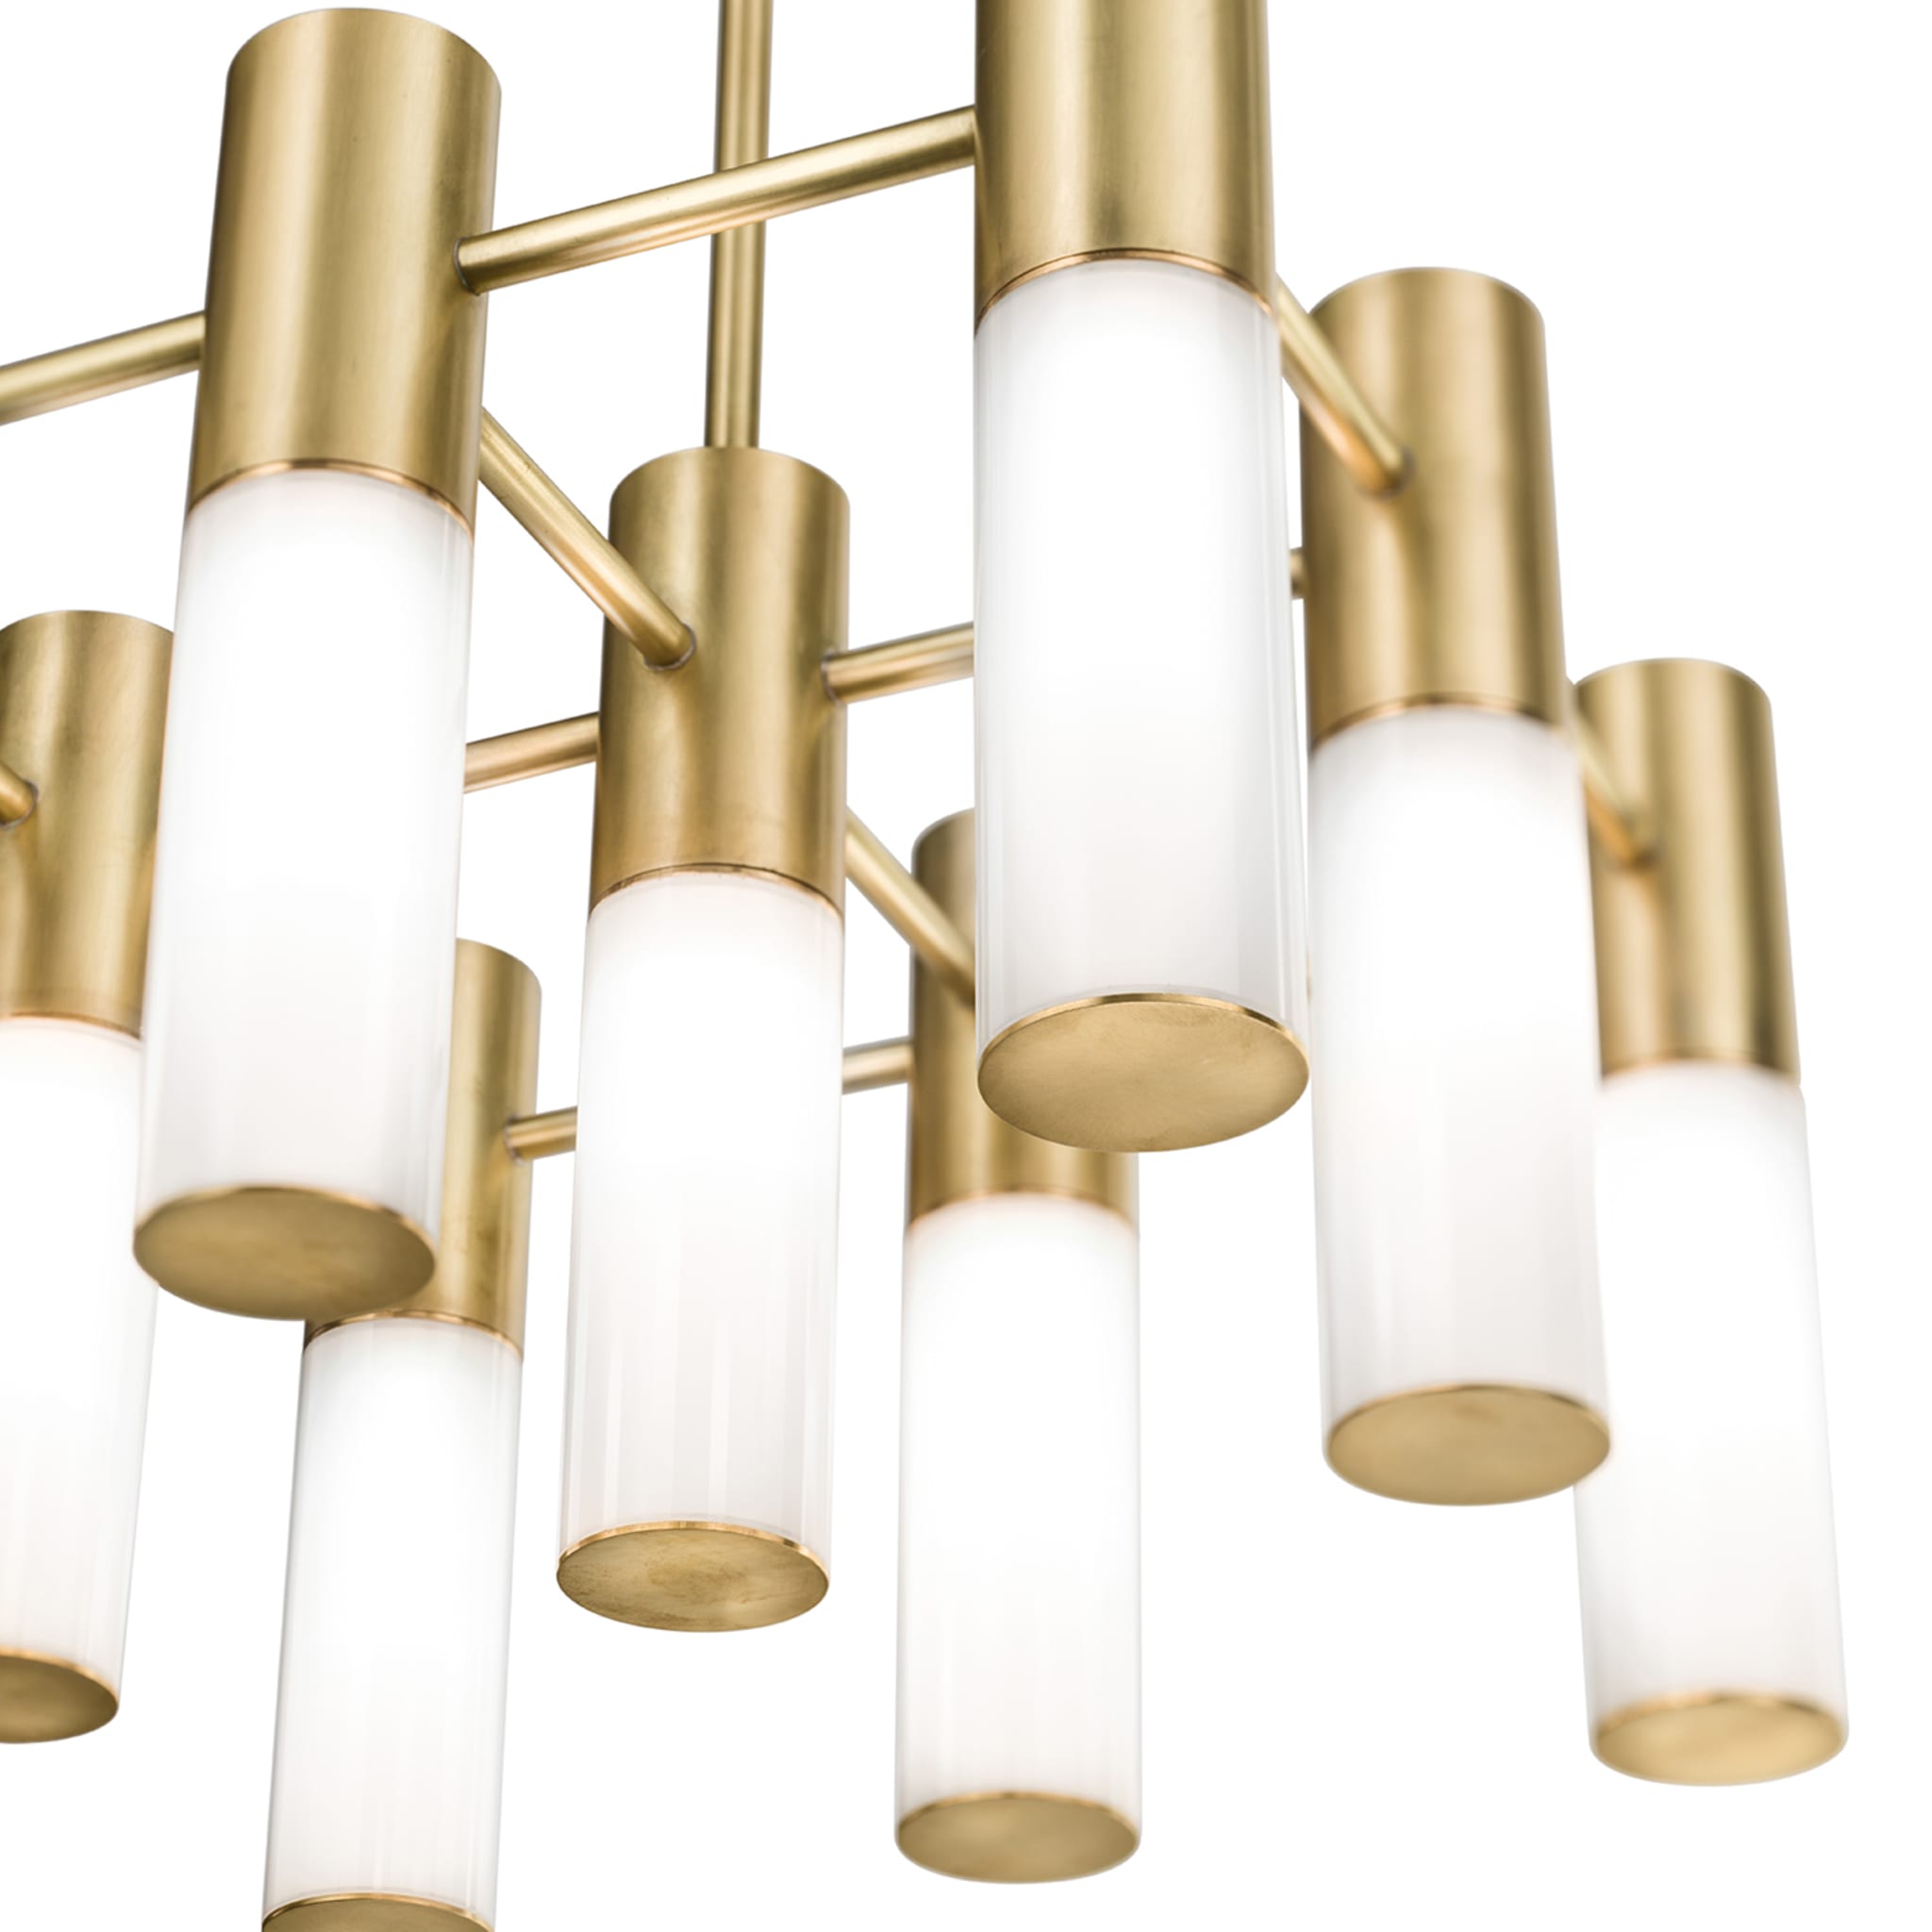 Etoile 9-Lights Natural Brass & White Glass Chandeliers - Alternative view 1